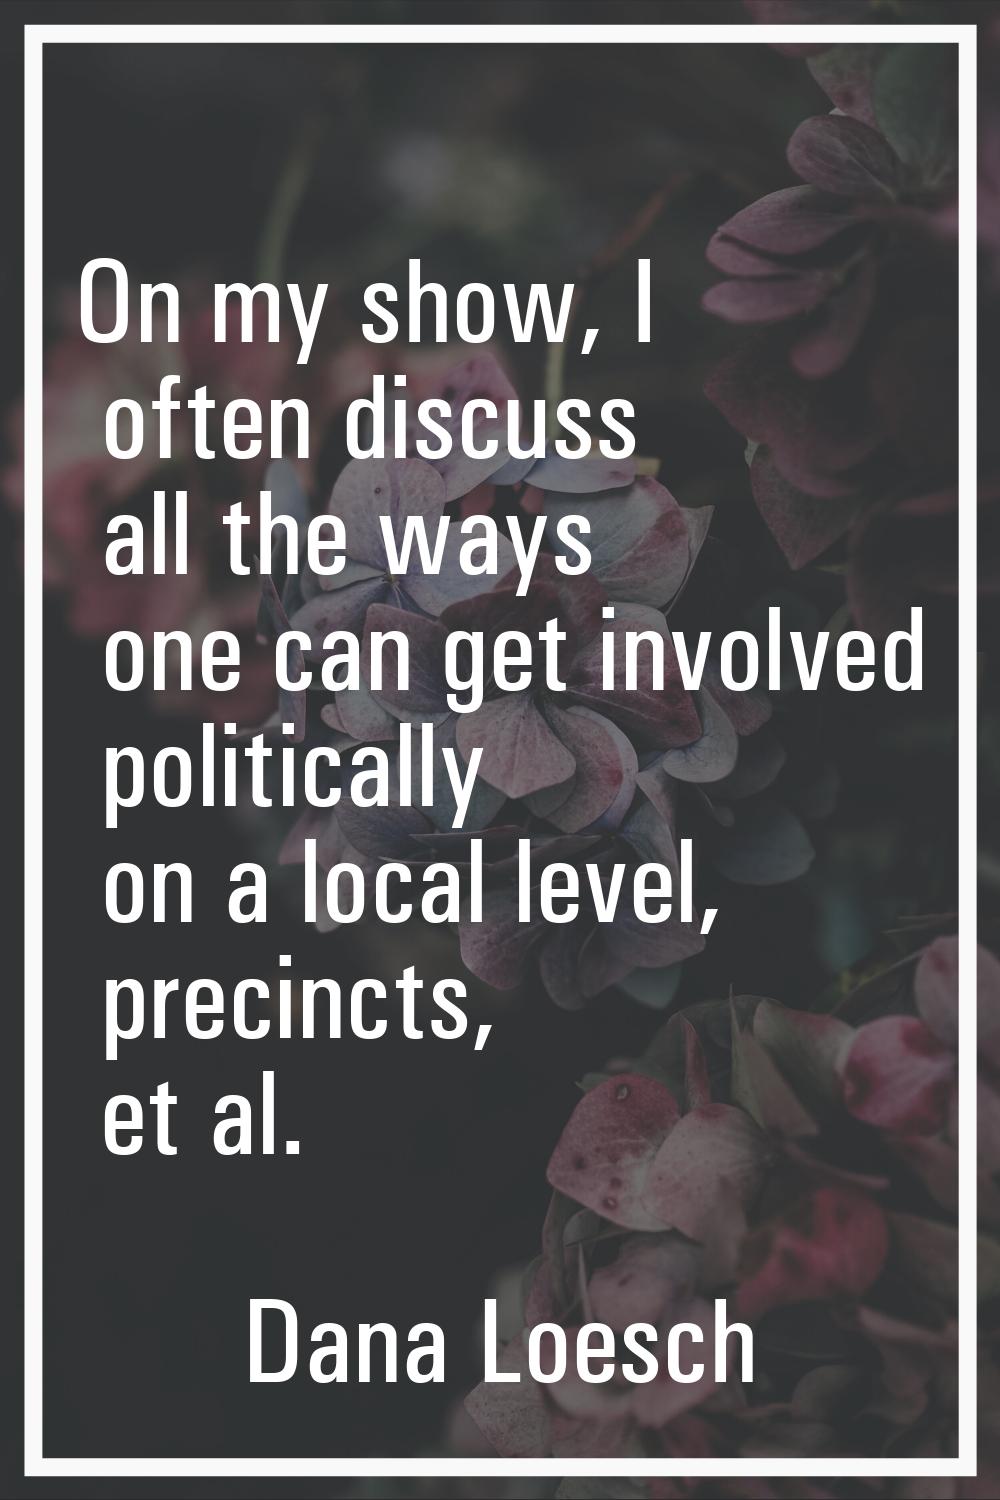 On my show, I often discuss all the ways one can get involved politically on a local level, precinc